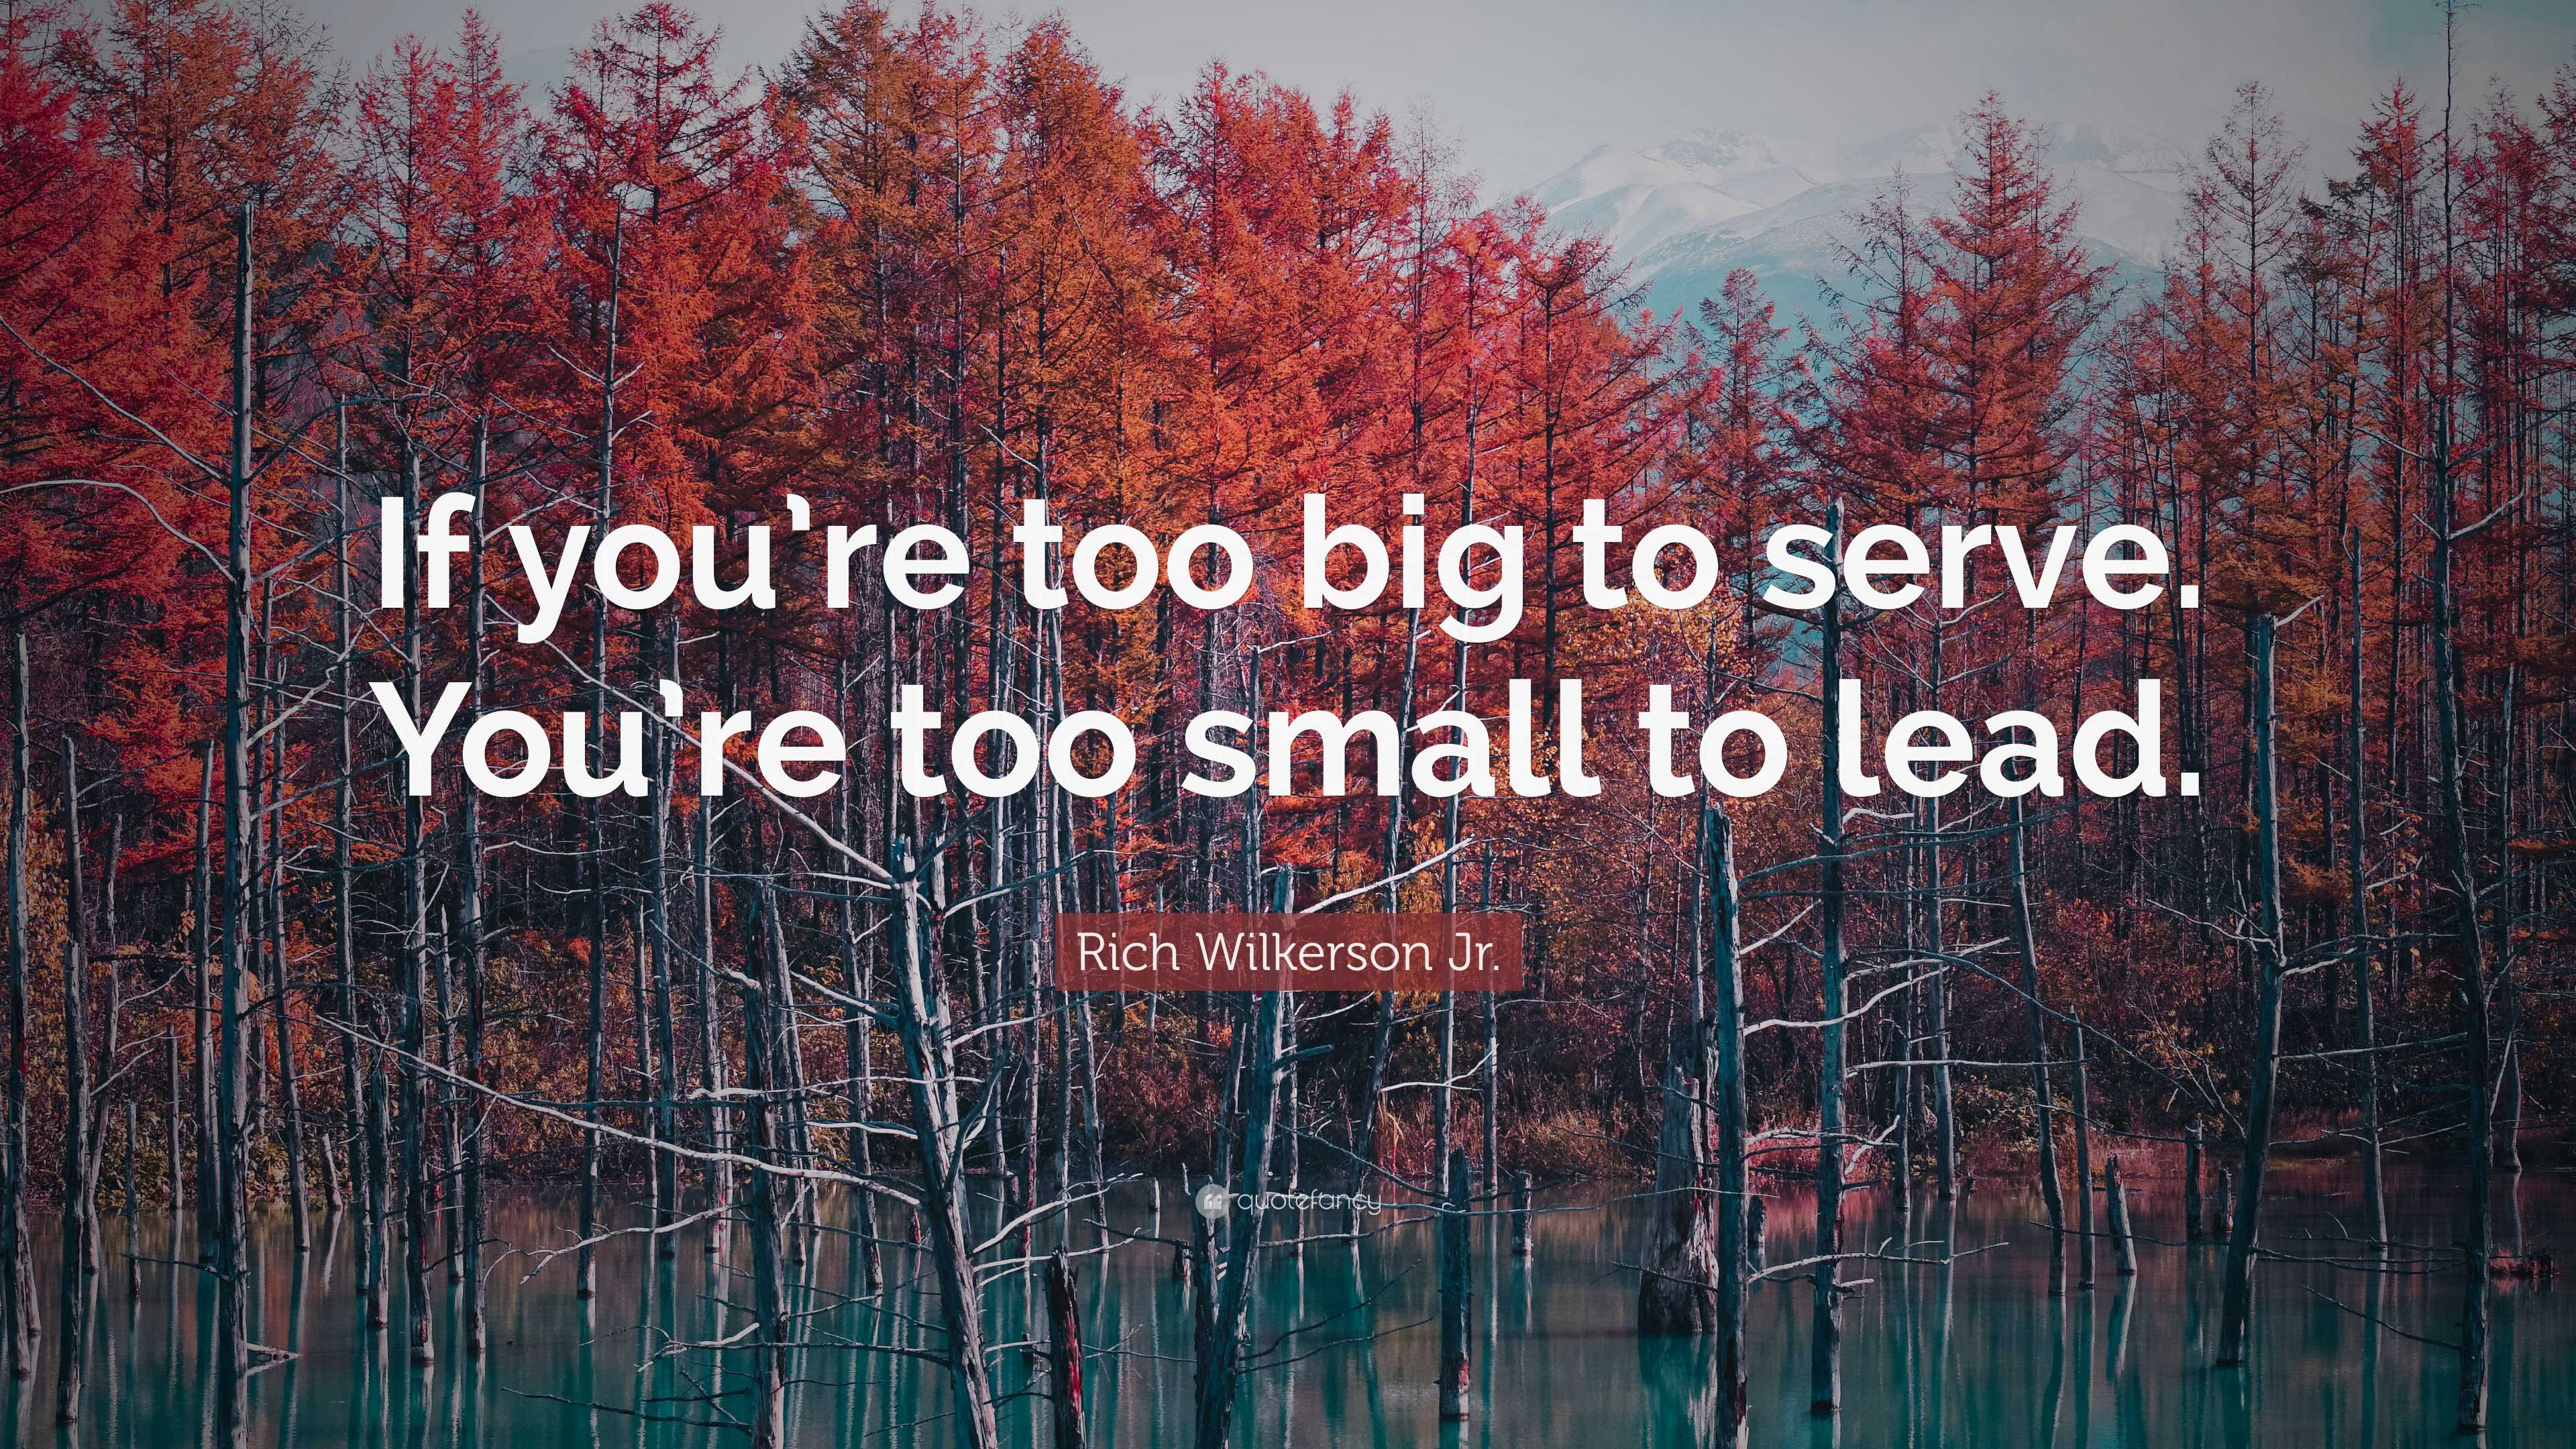 Rich Wilkerson Jr. Quote: “If you're too big to serve. You're too small to